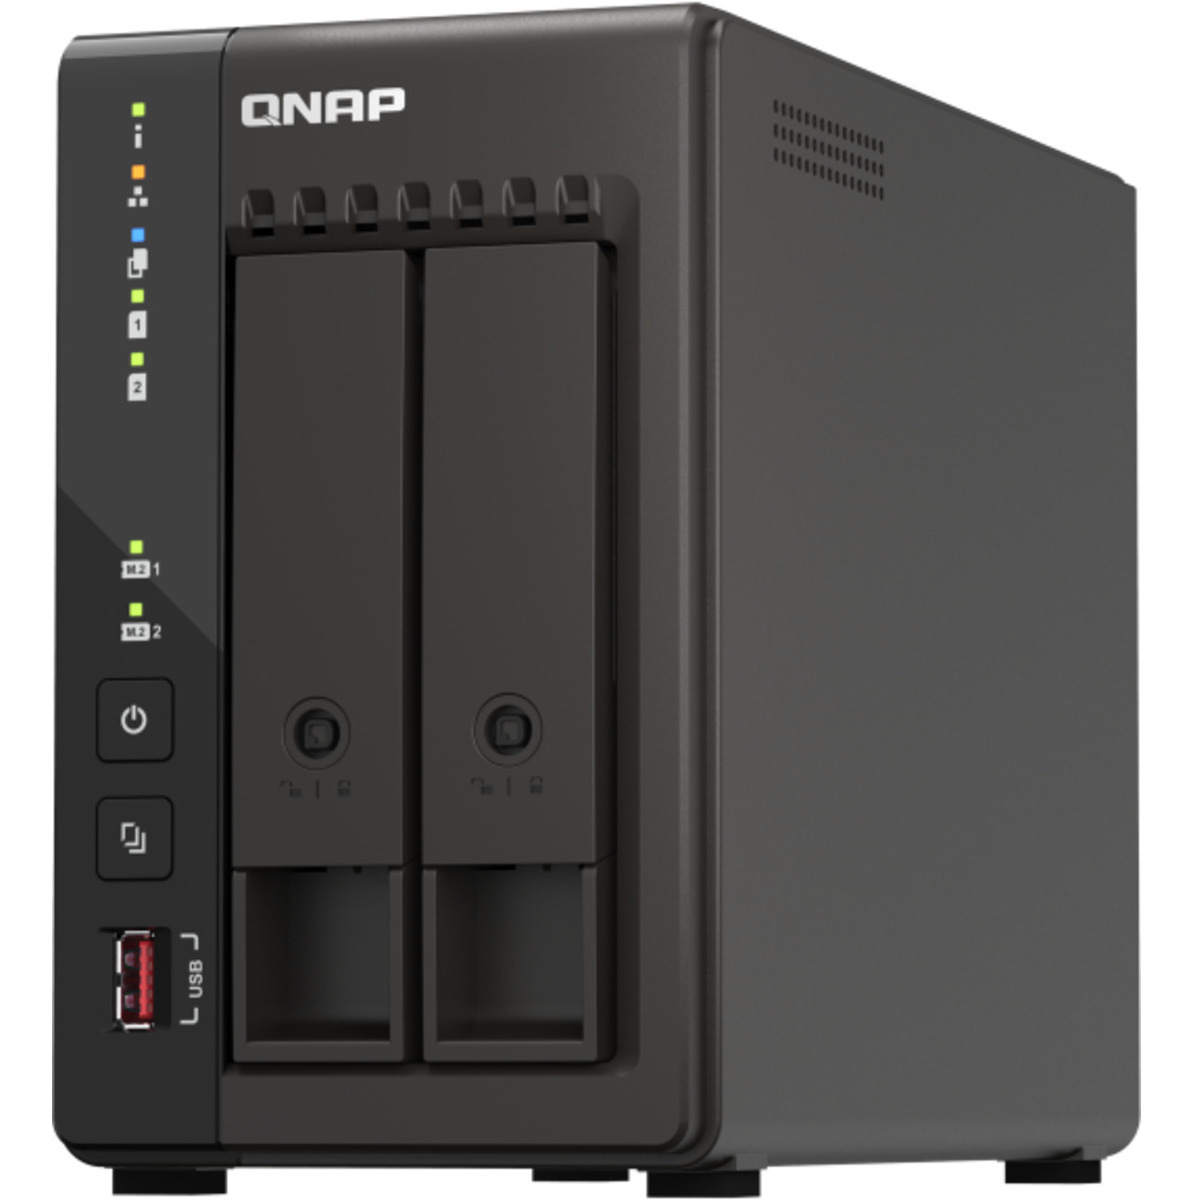 buy $1170 QNAP TS-253E 8tb Desktop NAS - Network Attached Storage Device 2x4000gb Samsung 870 EVO MZ-77E4T0BAM 2.5 560/530MB/s SATA 6Gb/s SSD CONSUMER Class Drives Installed - Burn-In Tested - nas headquarters buy network attached storage server device das new raid-5 free shipping simply usa TS-253E